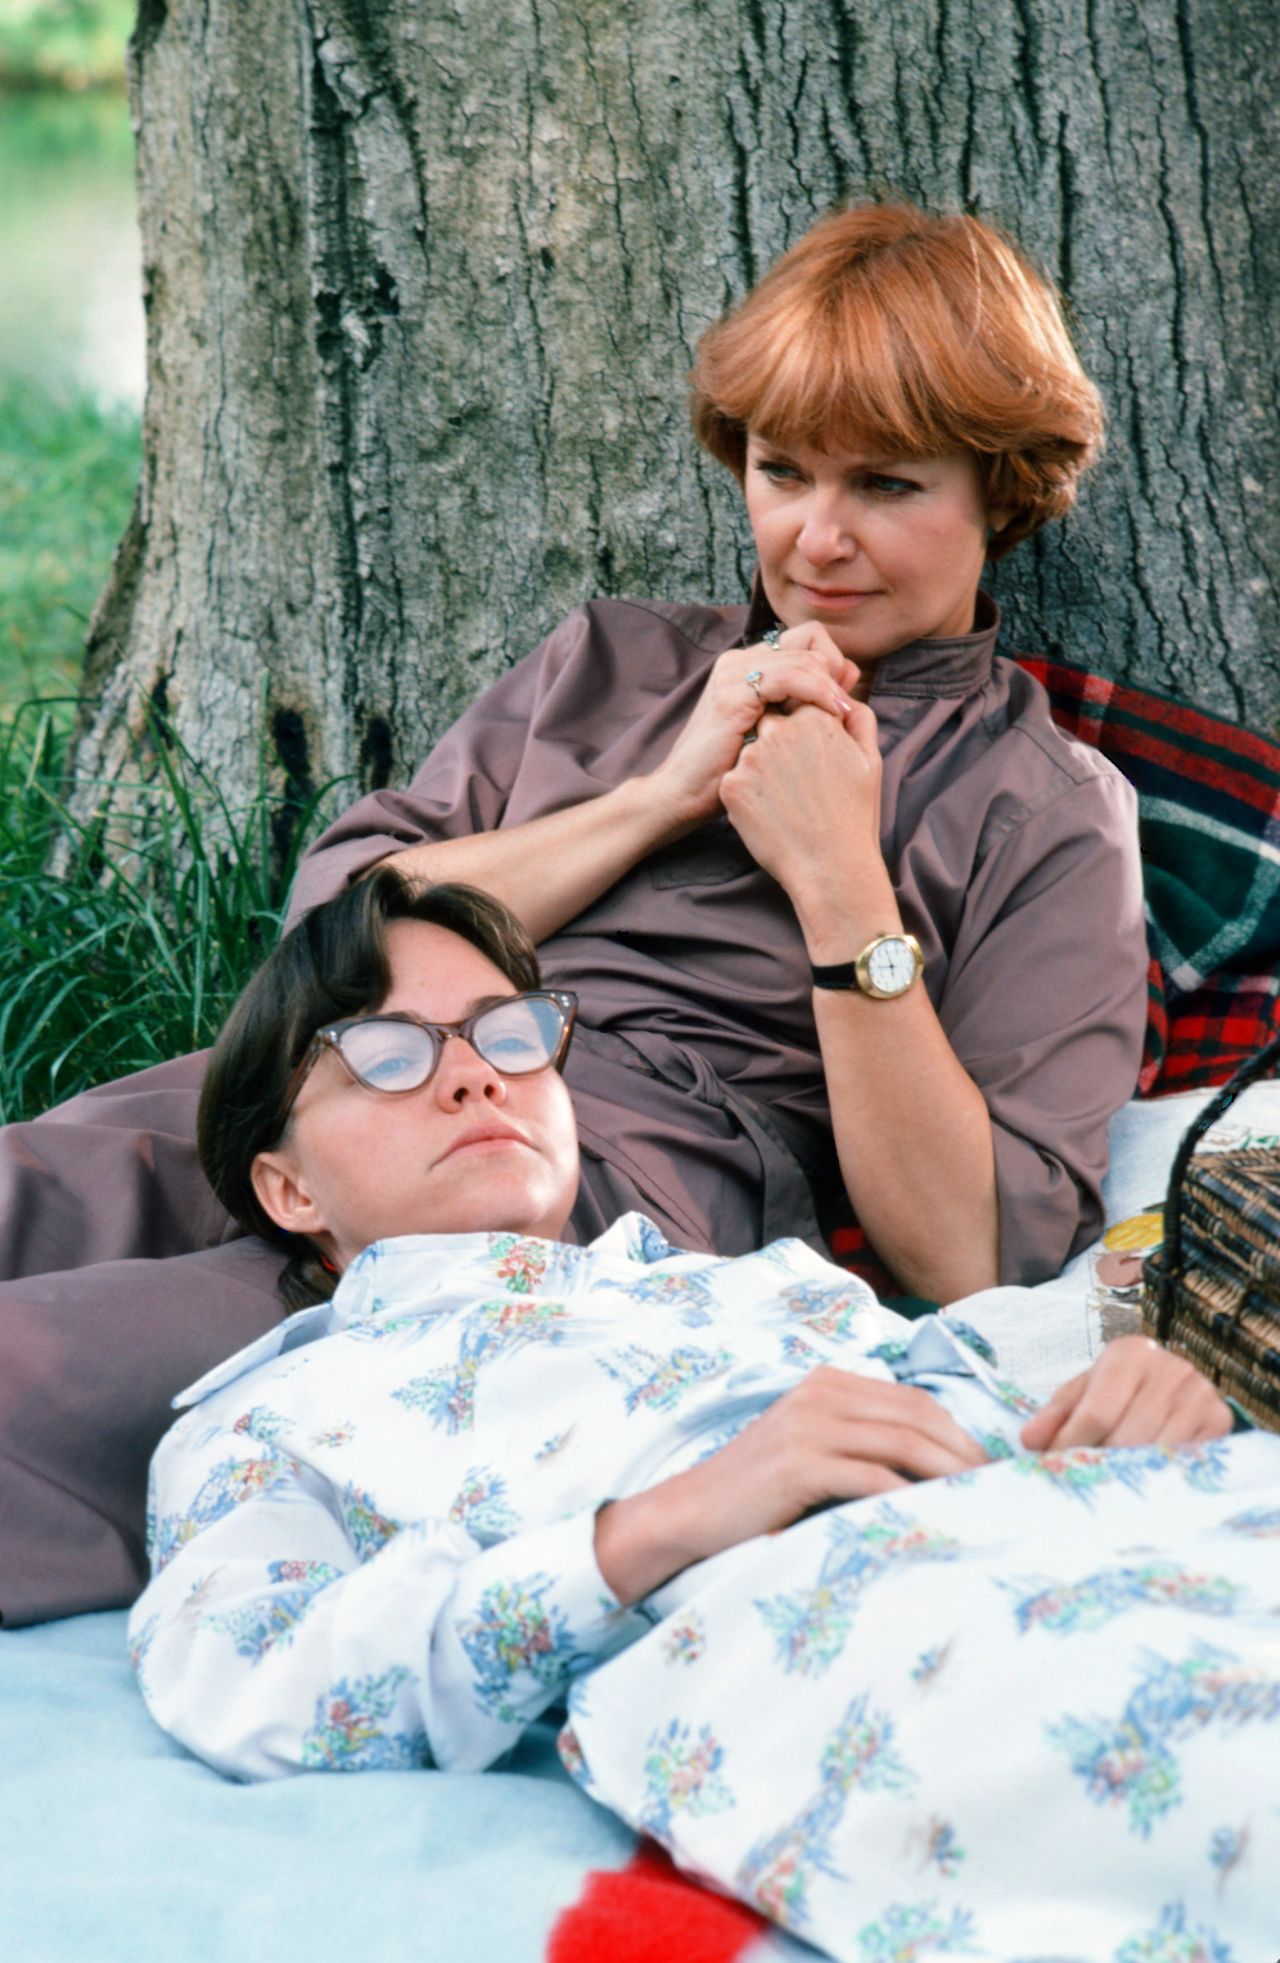 Field, bottom, and Joanne Woodward star in the miniseries "Sybil" in 1976. Field won an Emmy Award for her role as a young woman with dissociative identity disorder.